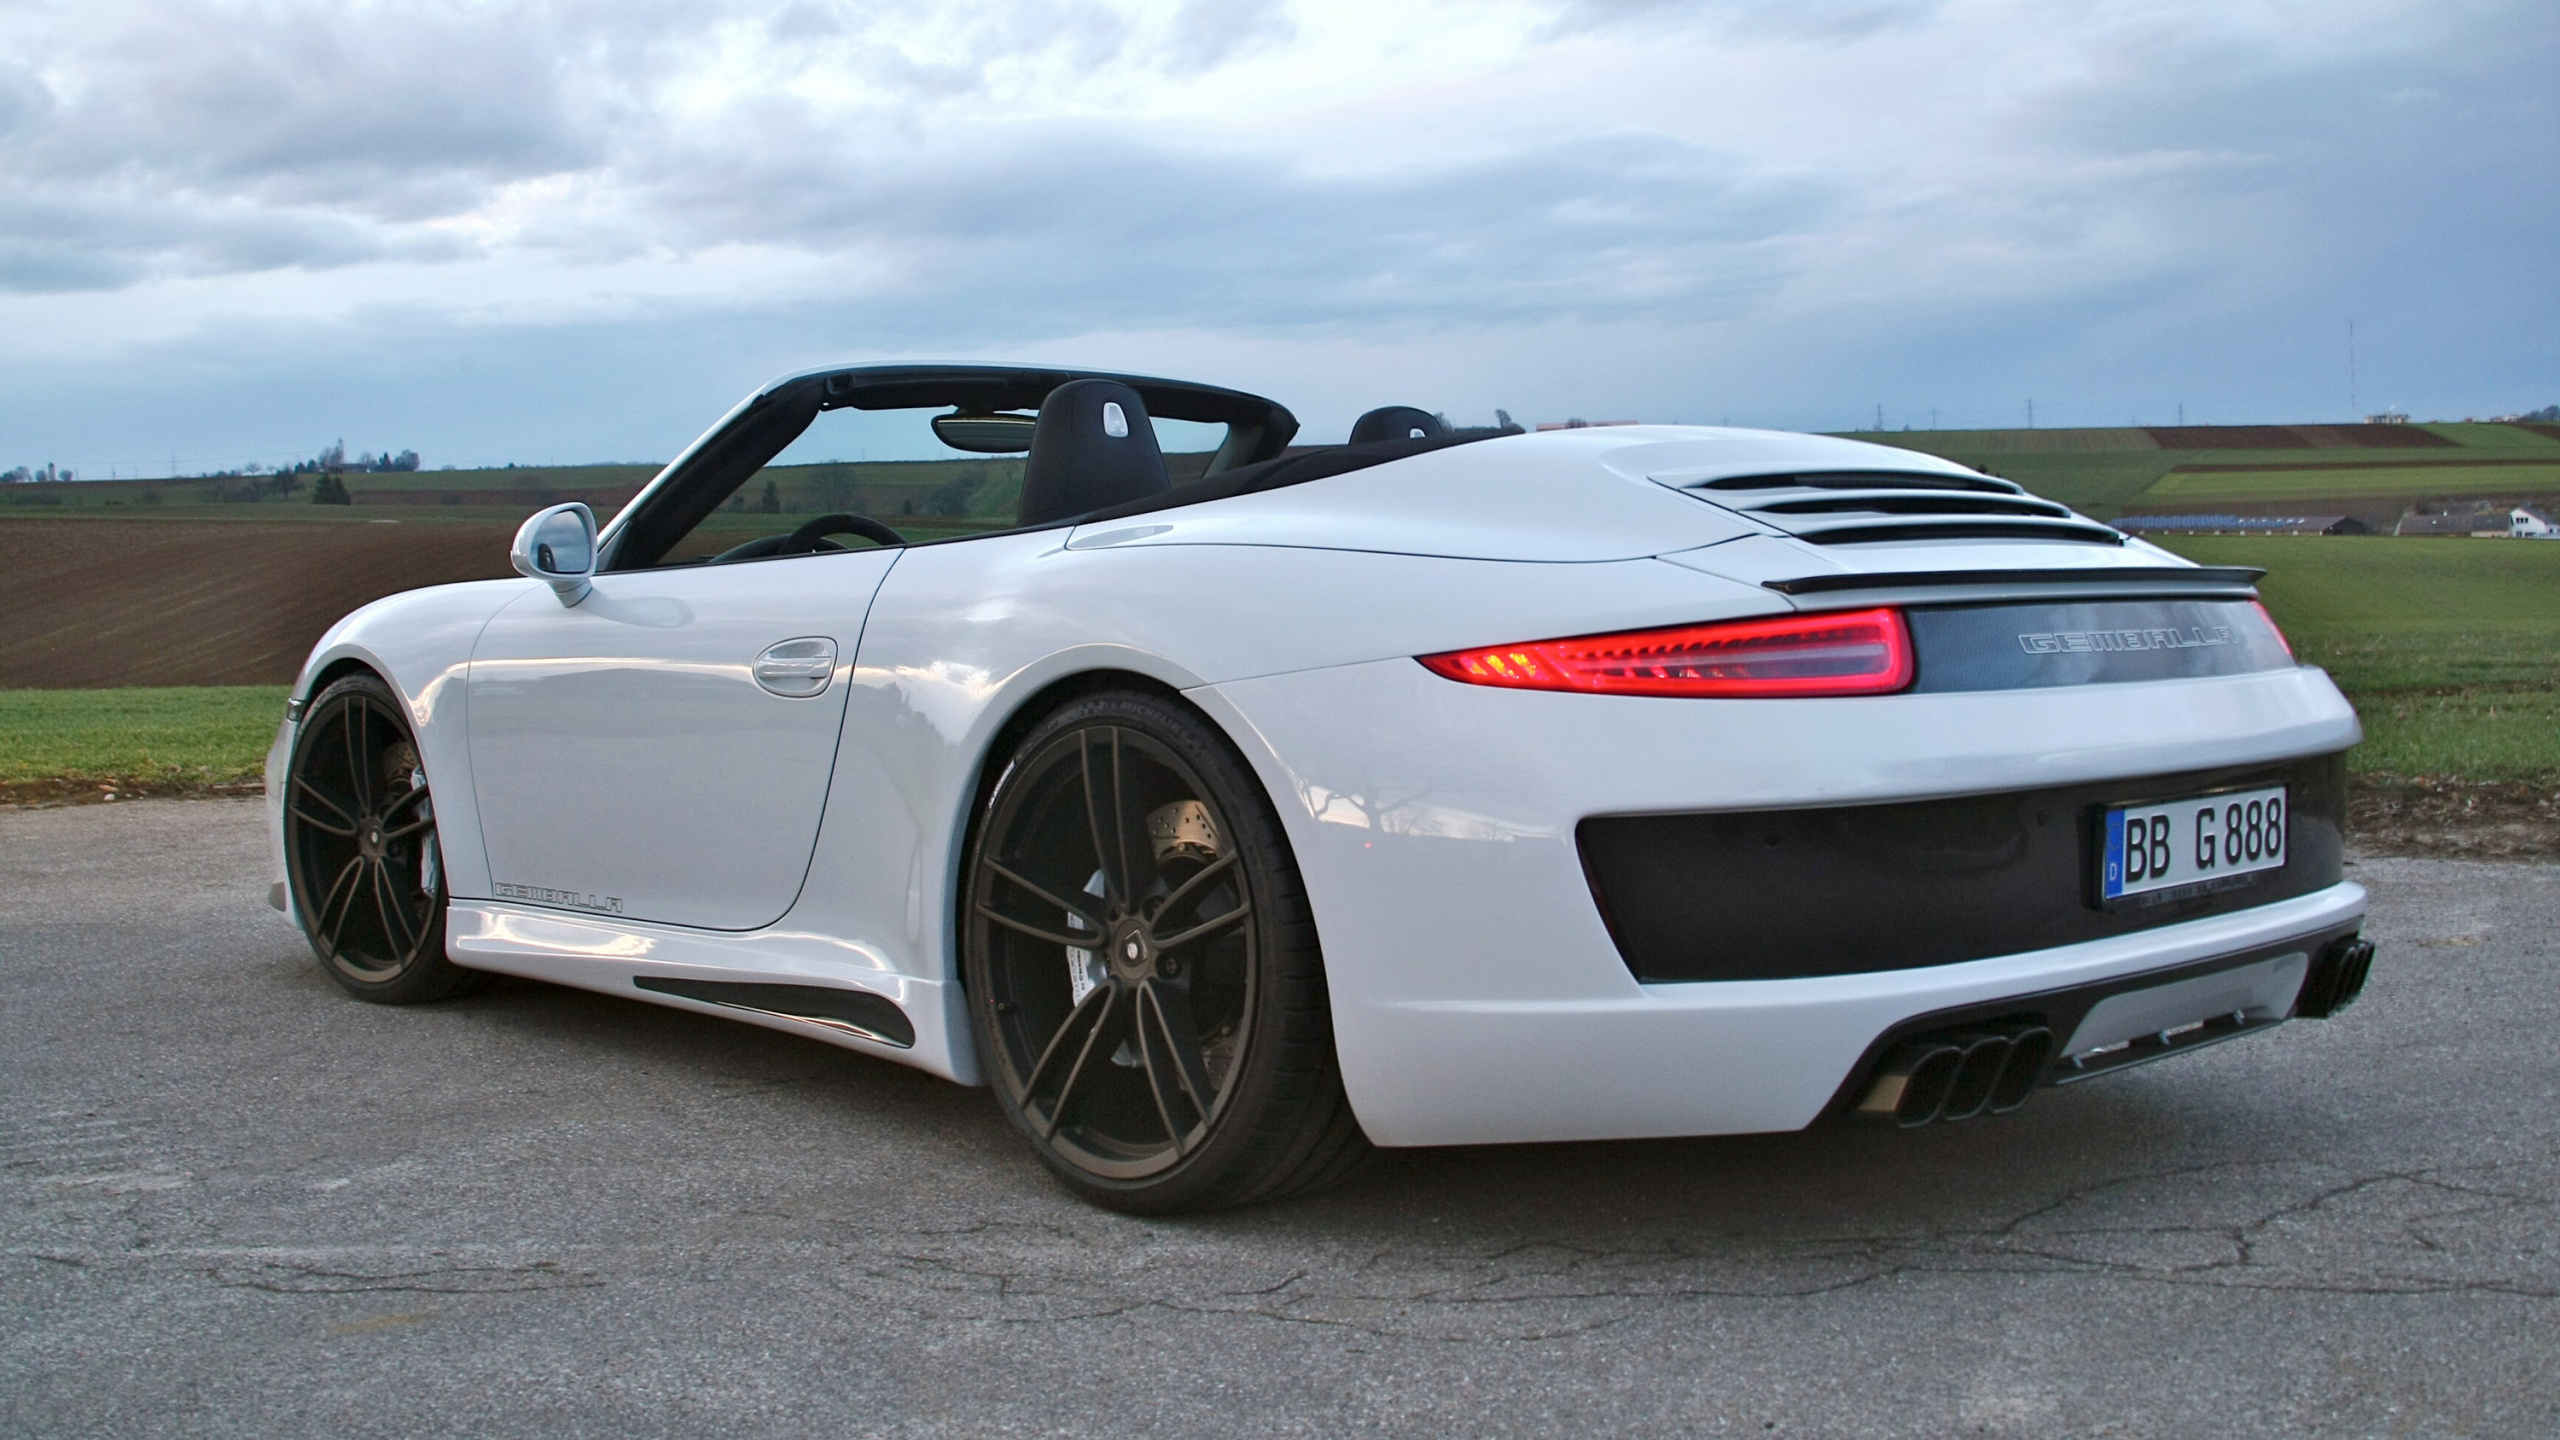 White Porsche 911 on Road Under Cloudy Sky During Daytime. Wallpaper in 2560x1440 Resolution